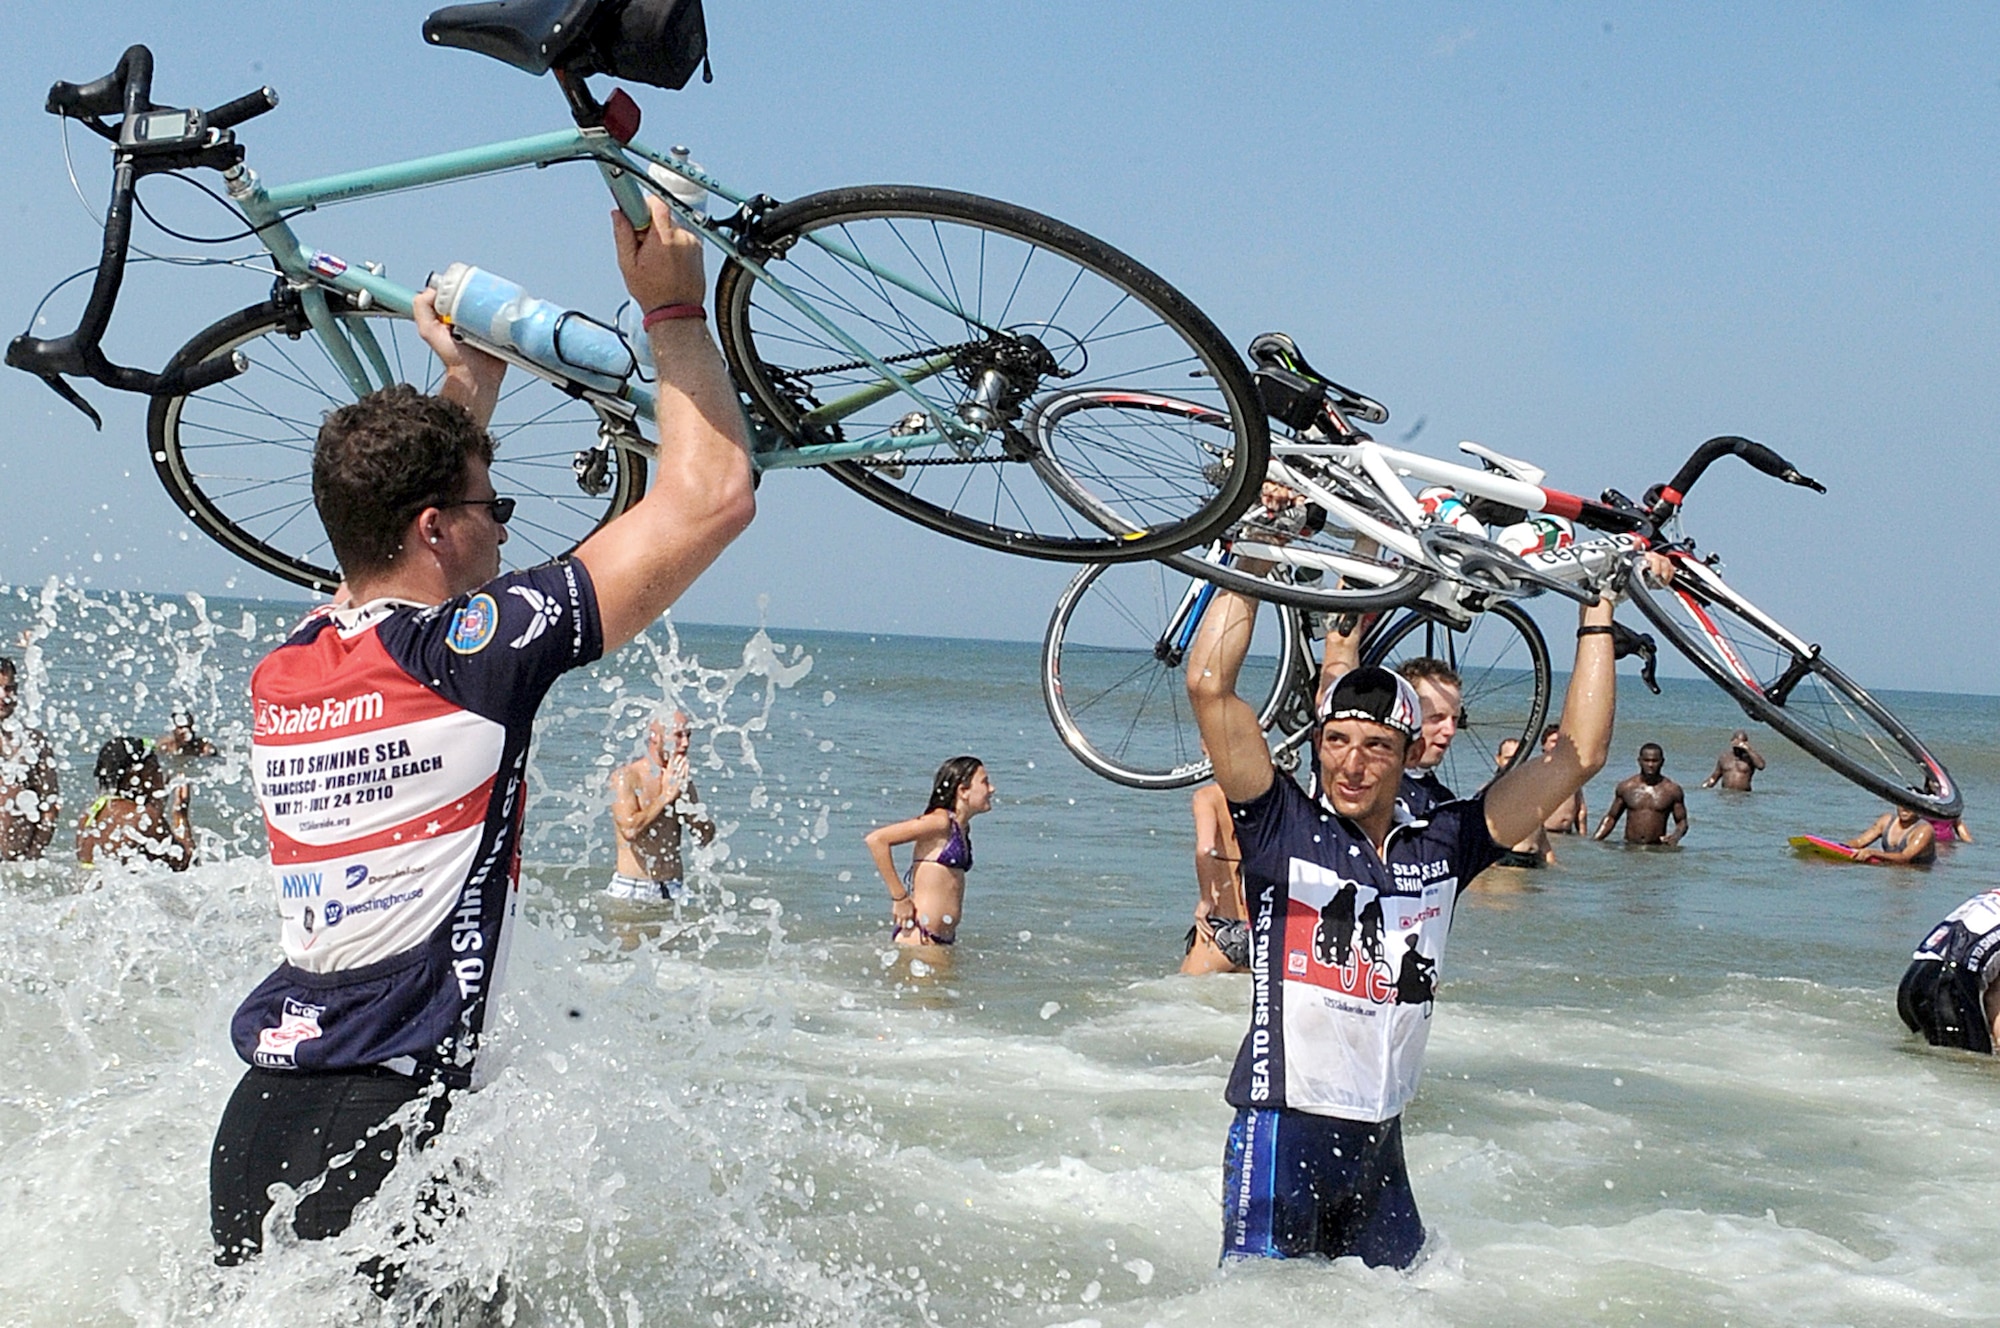 Riders celebrate in the Atlantic Ocean during the closing ceremony of Sea to Shining Sea July 24, 2010, in Virginia Beach, Va. Sea to Shining Sea is a 4,000-mile bike ride that started at the Golden Gate Bridge in San Francisco, and ended in Virginia Beach. (U.S. Air Force photo/Staff Sgt. Christina M. Styer)